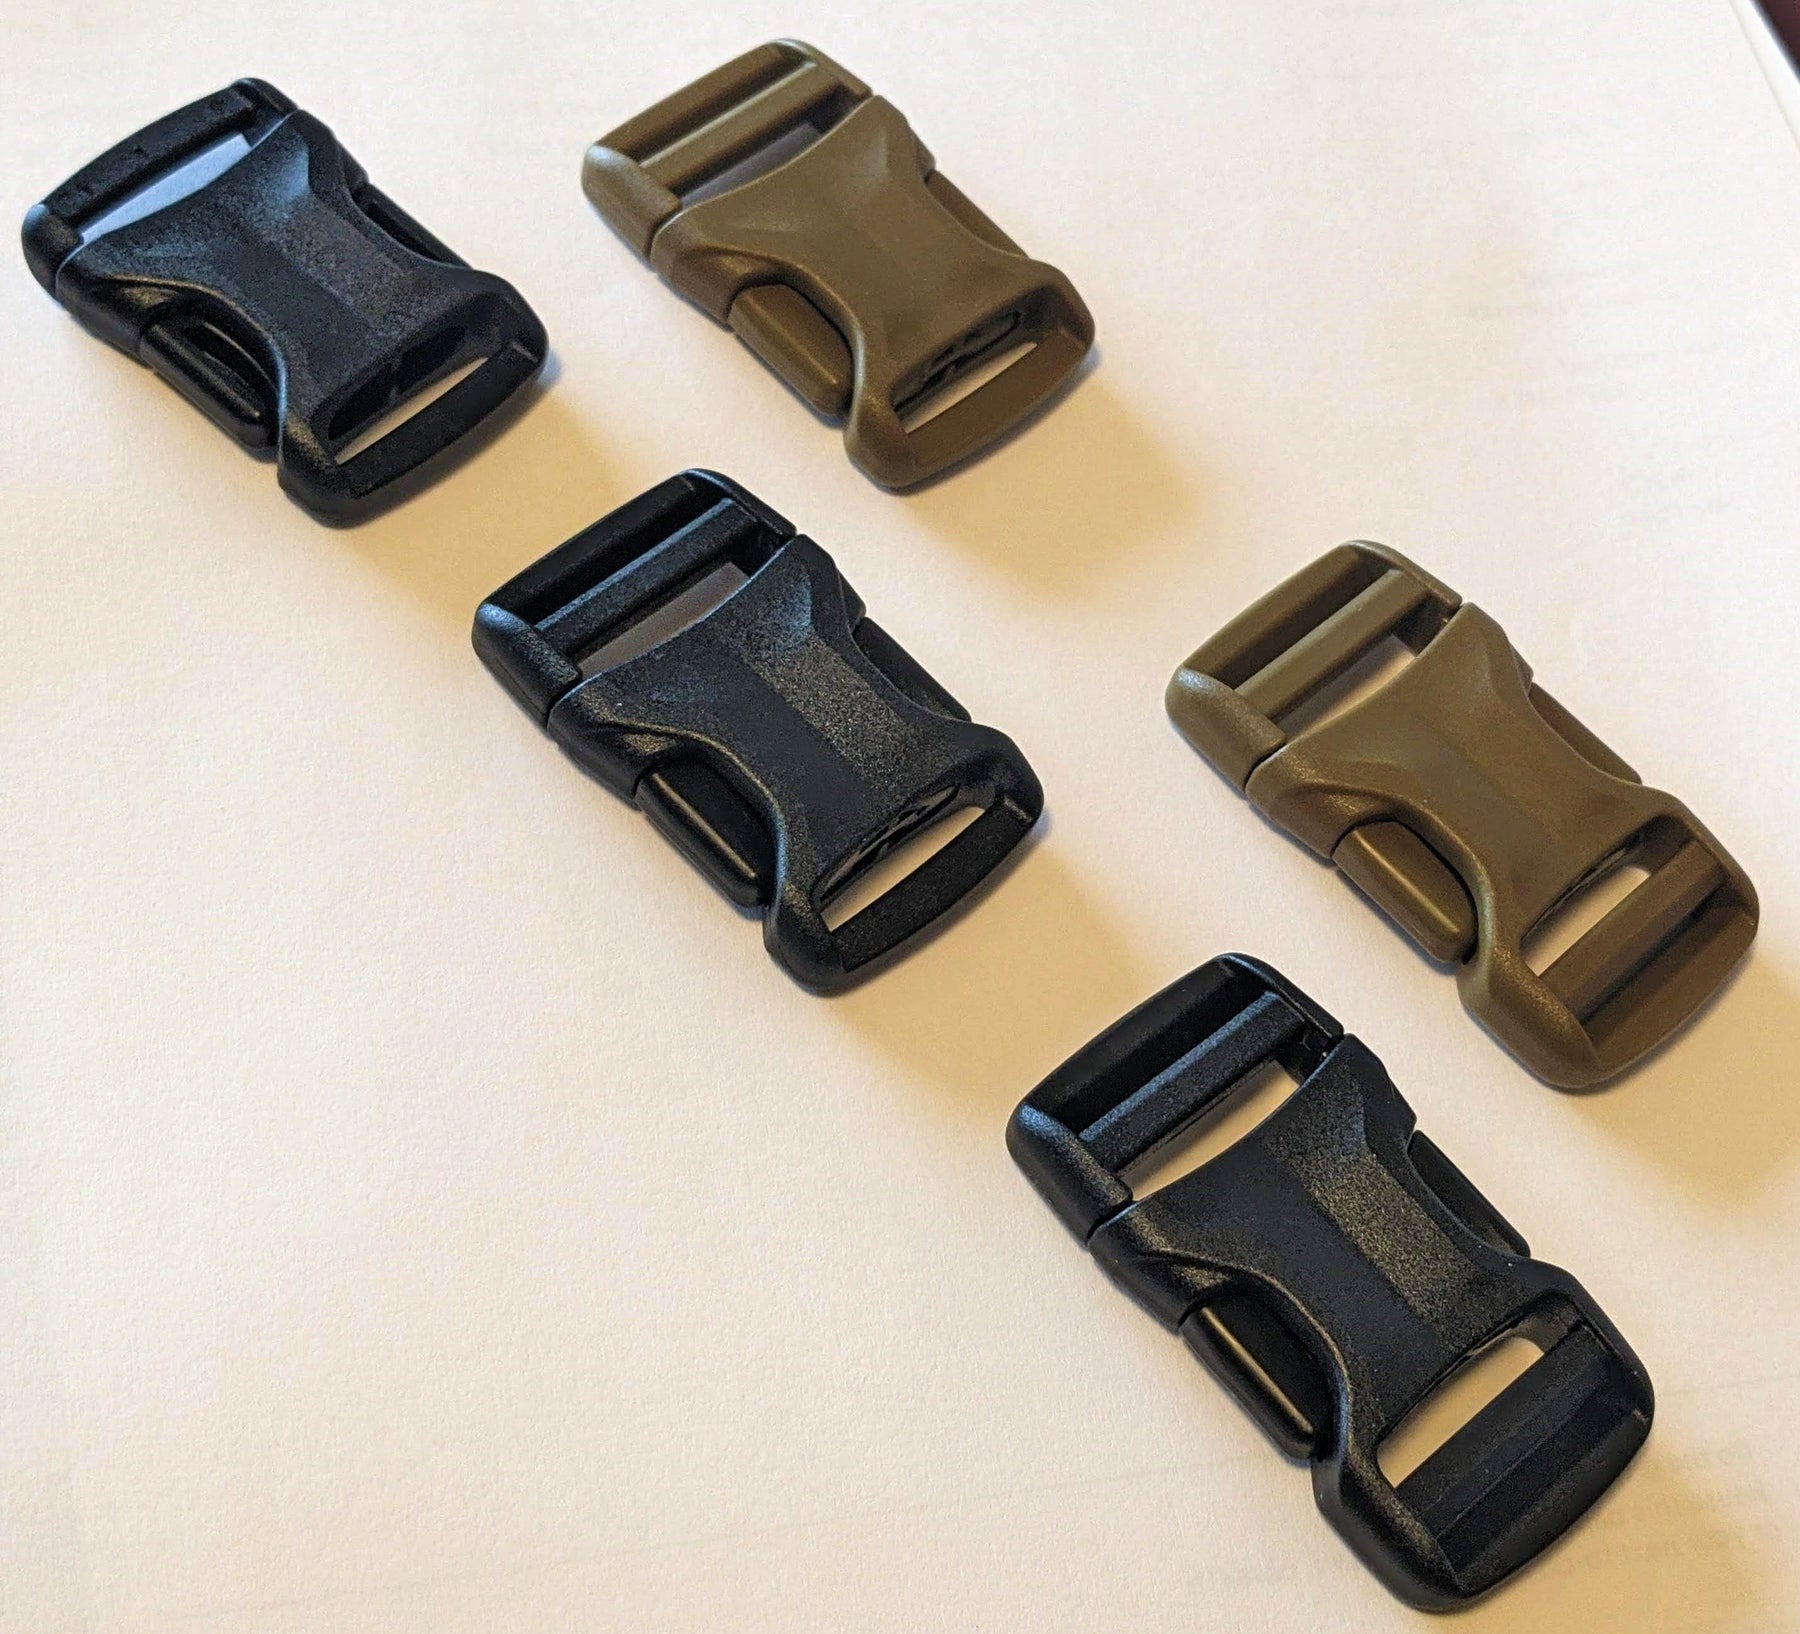 Alto Dual Adjust Buckle - 25mm - Black and Coyote Brown